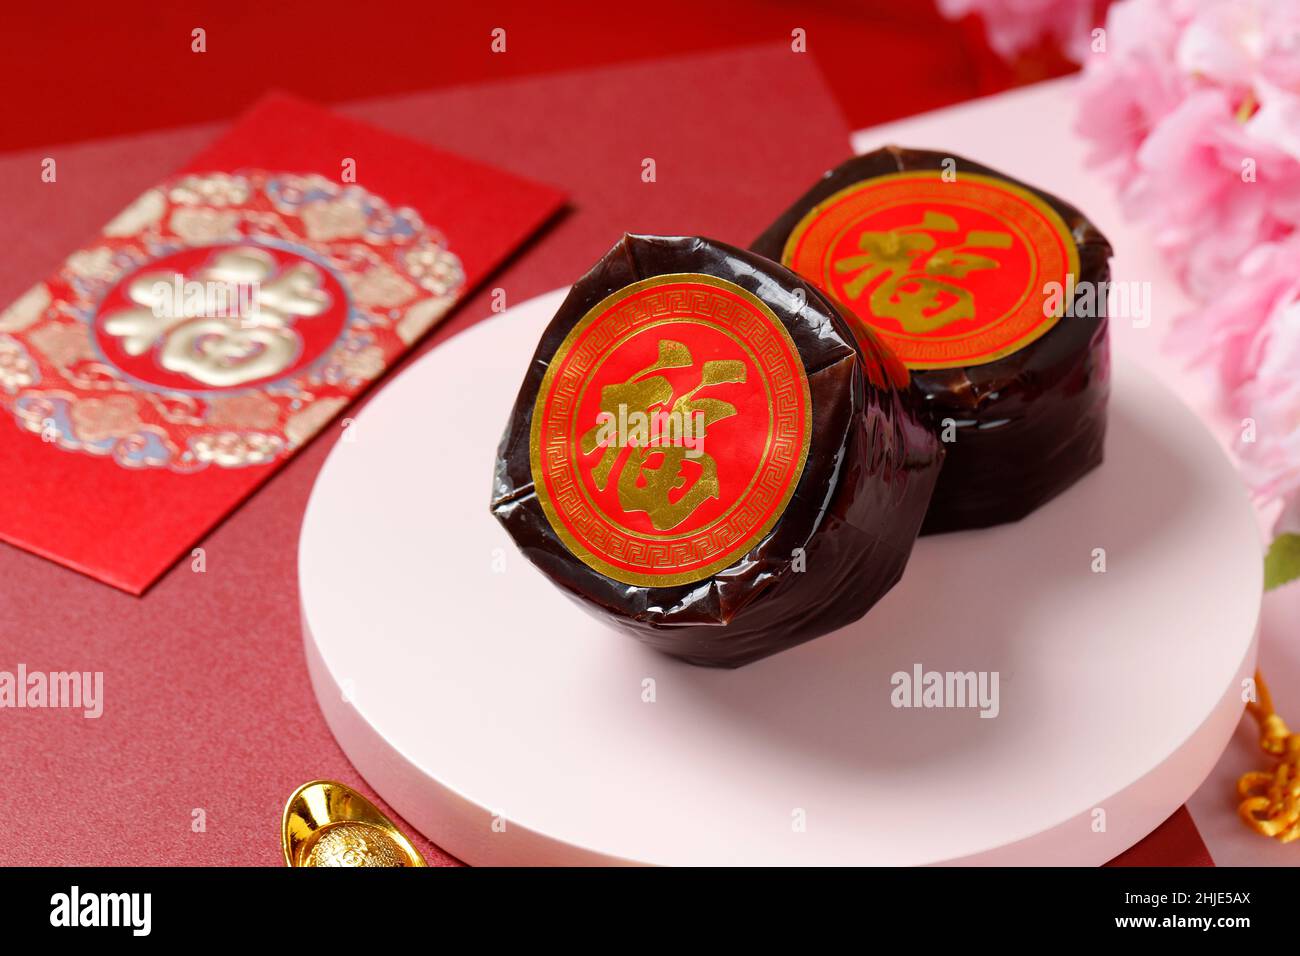 Chinese New Year Cake with Chinese character Fu means Fortune. Popular as Kue Keranjang or Dodol China in Indonesia. Imlek Red Concept Decoration Stock Photo